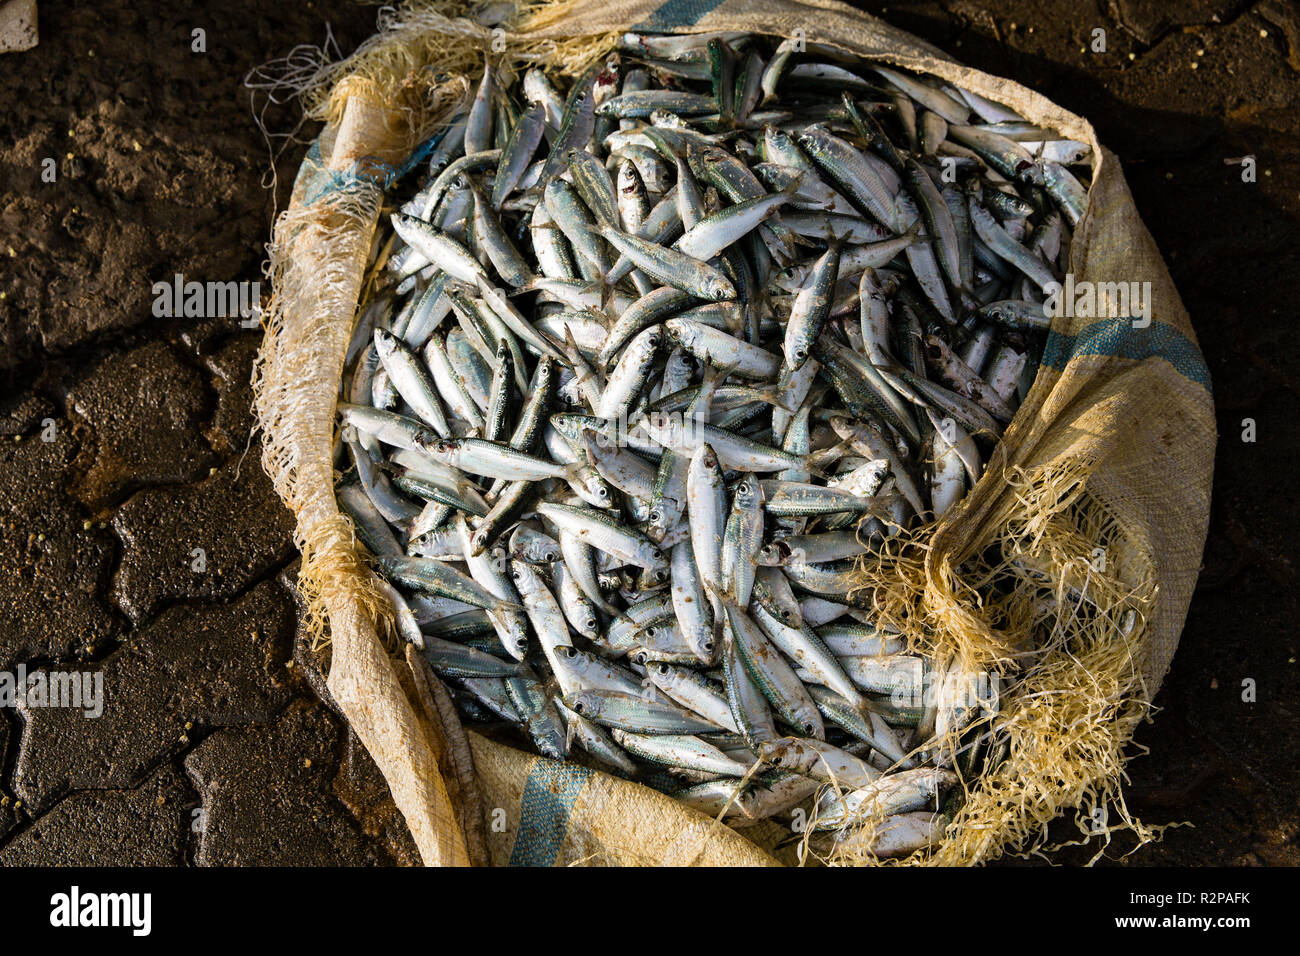 View of a sack filled with small, freshly caught fish Stock Photo